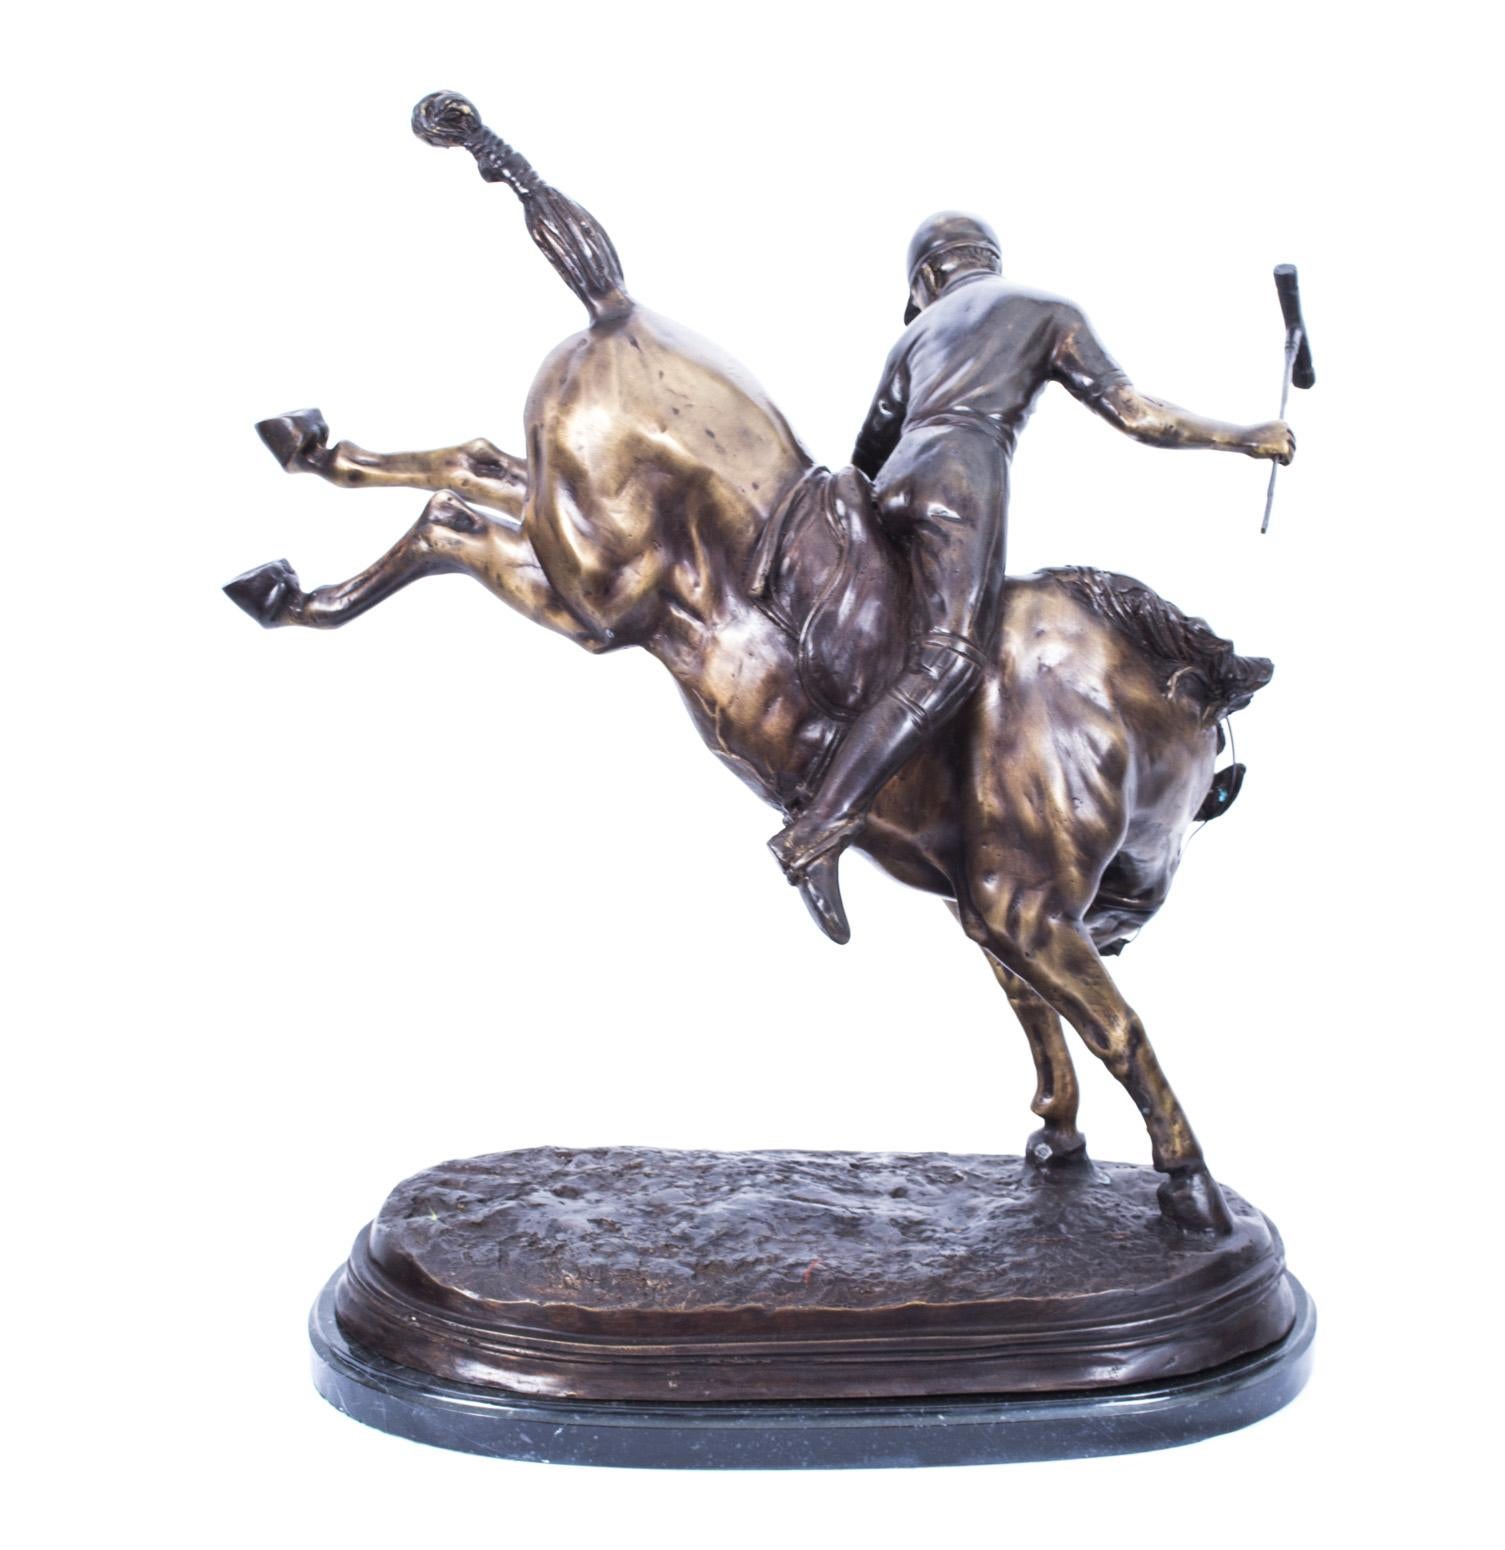 Vintage Bronze Polo Player Bucking a Horse Sculpture, 20th Century For Sale 3